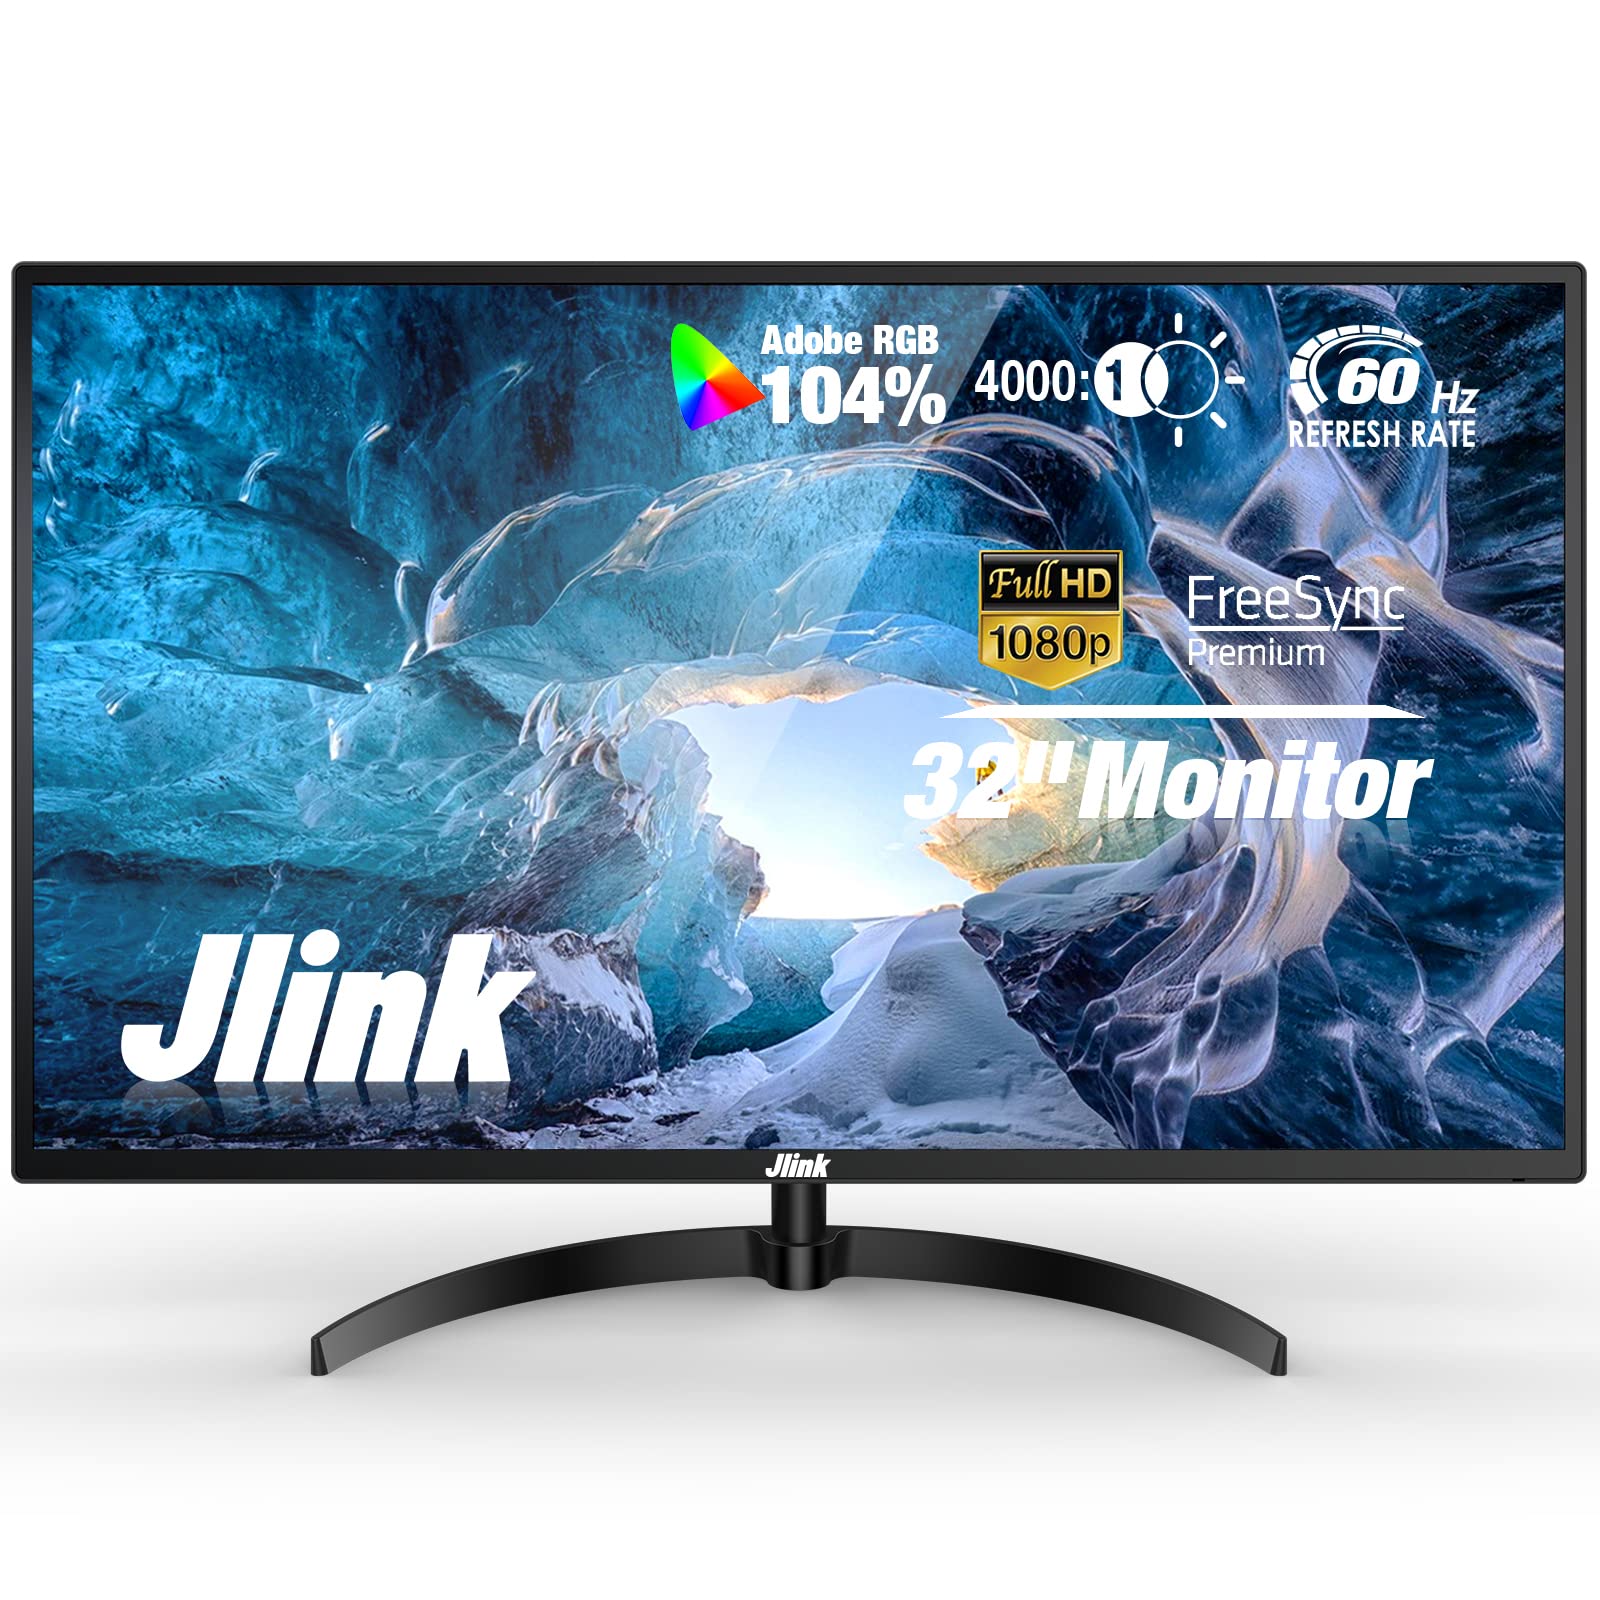 Jlink Computer Monitor -  FHD 32 Inch Monitor, 1920x1080P 60Hz 104% sRGB LCD Display with HDMI VGA 3.5mm Audio, HDR Low Blue Light Anti-Glare Larger VA Screen with Freesync, Tiltable & VESA Mountable